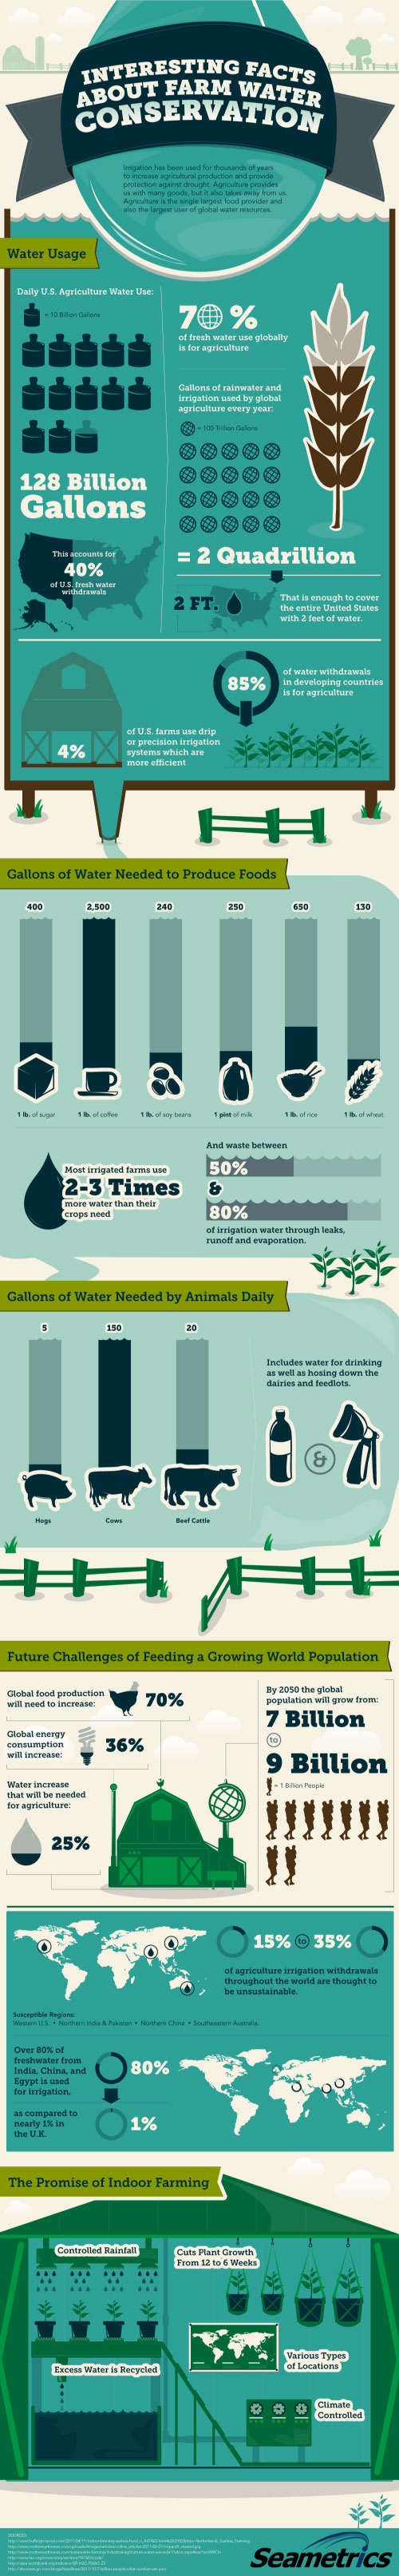 infographic farm water